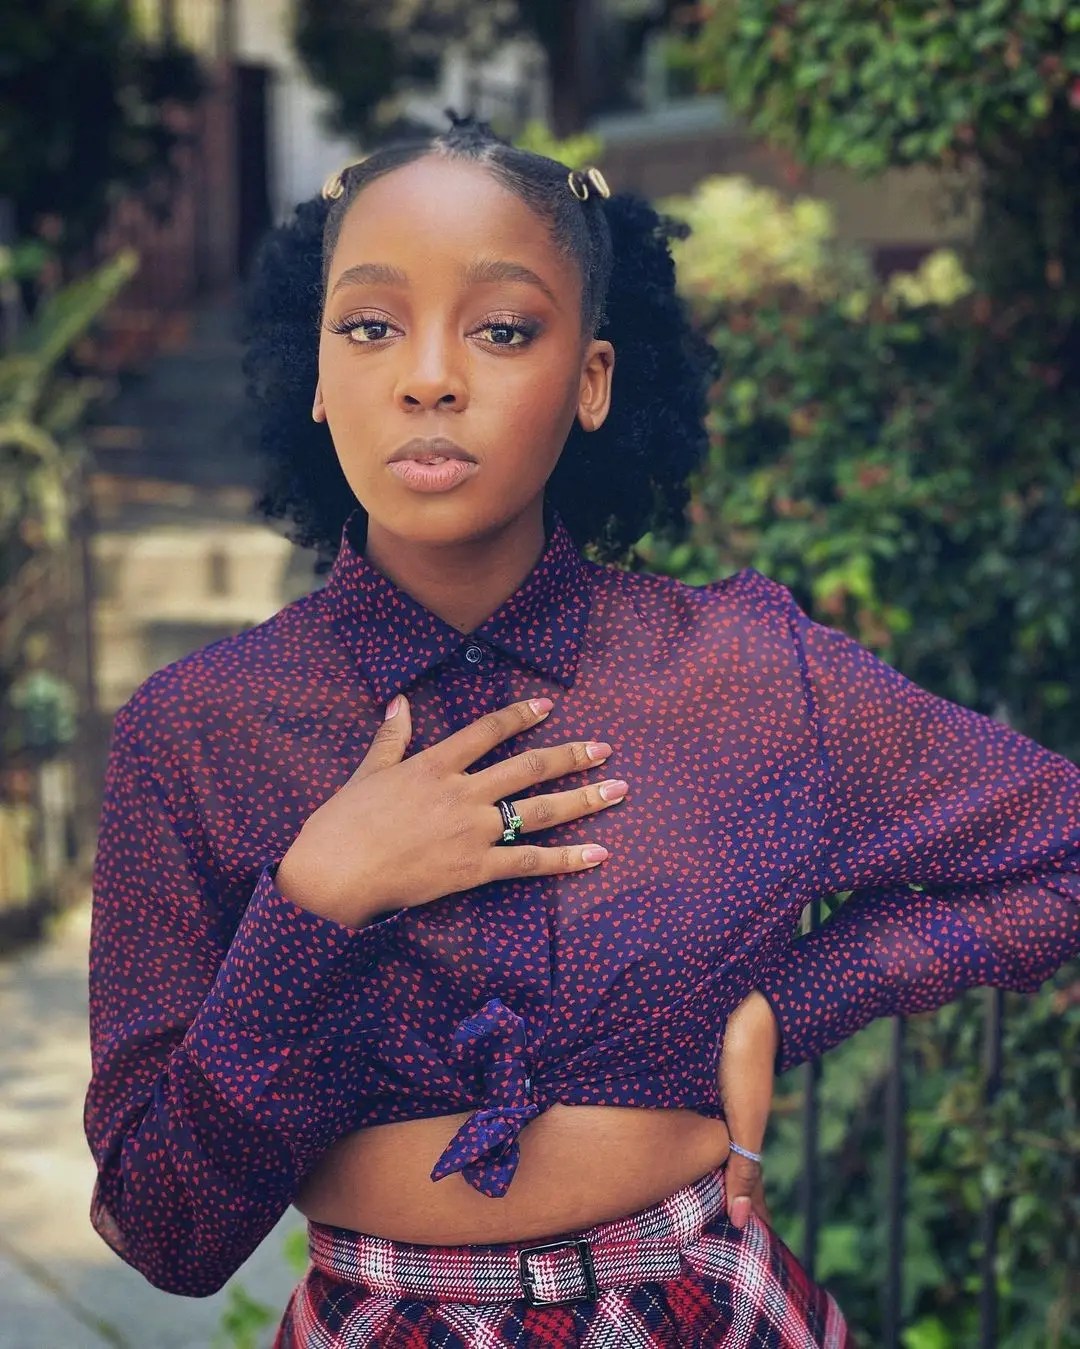 Actress Thuso Mbedu refutes claims she helped her bestie, Makgotso M bag her role on ‘The Woman King’